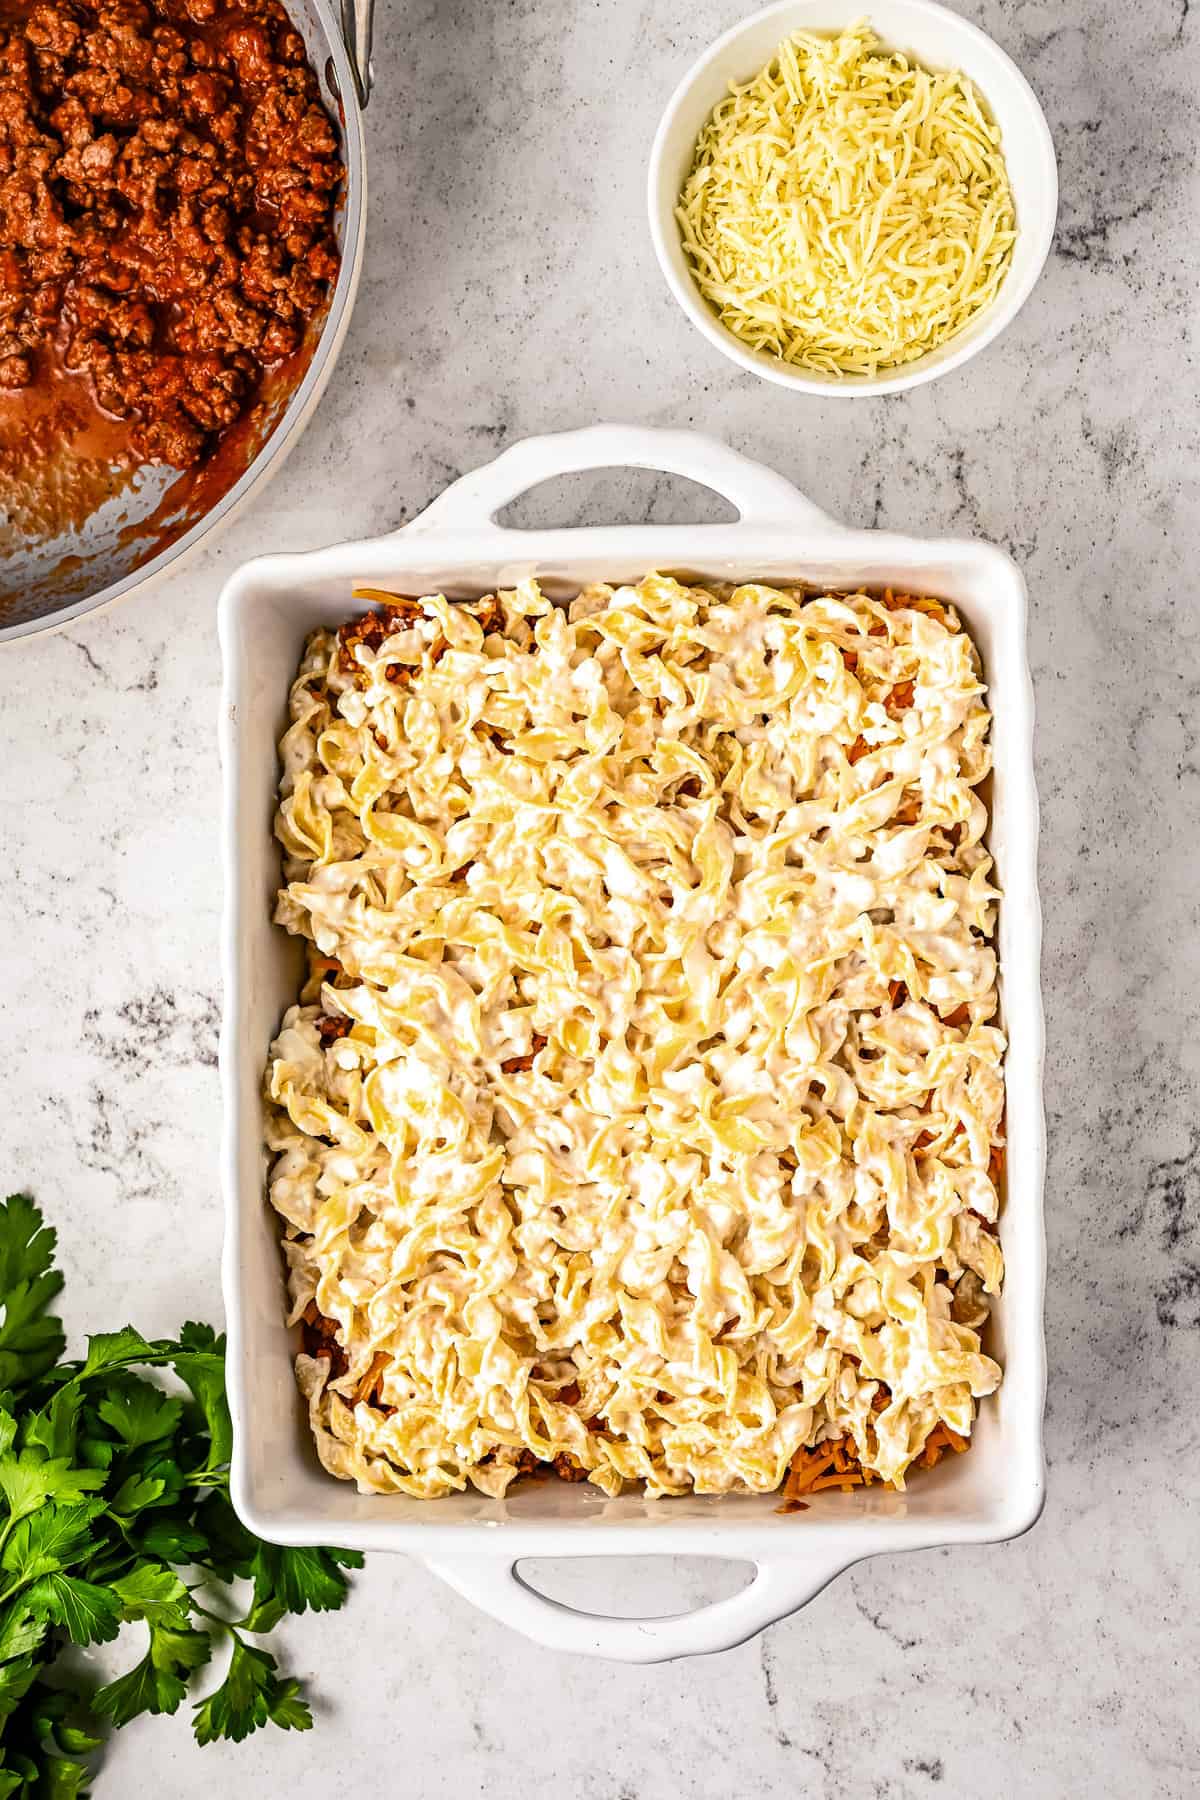 Egg noodles in casserole dish